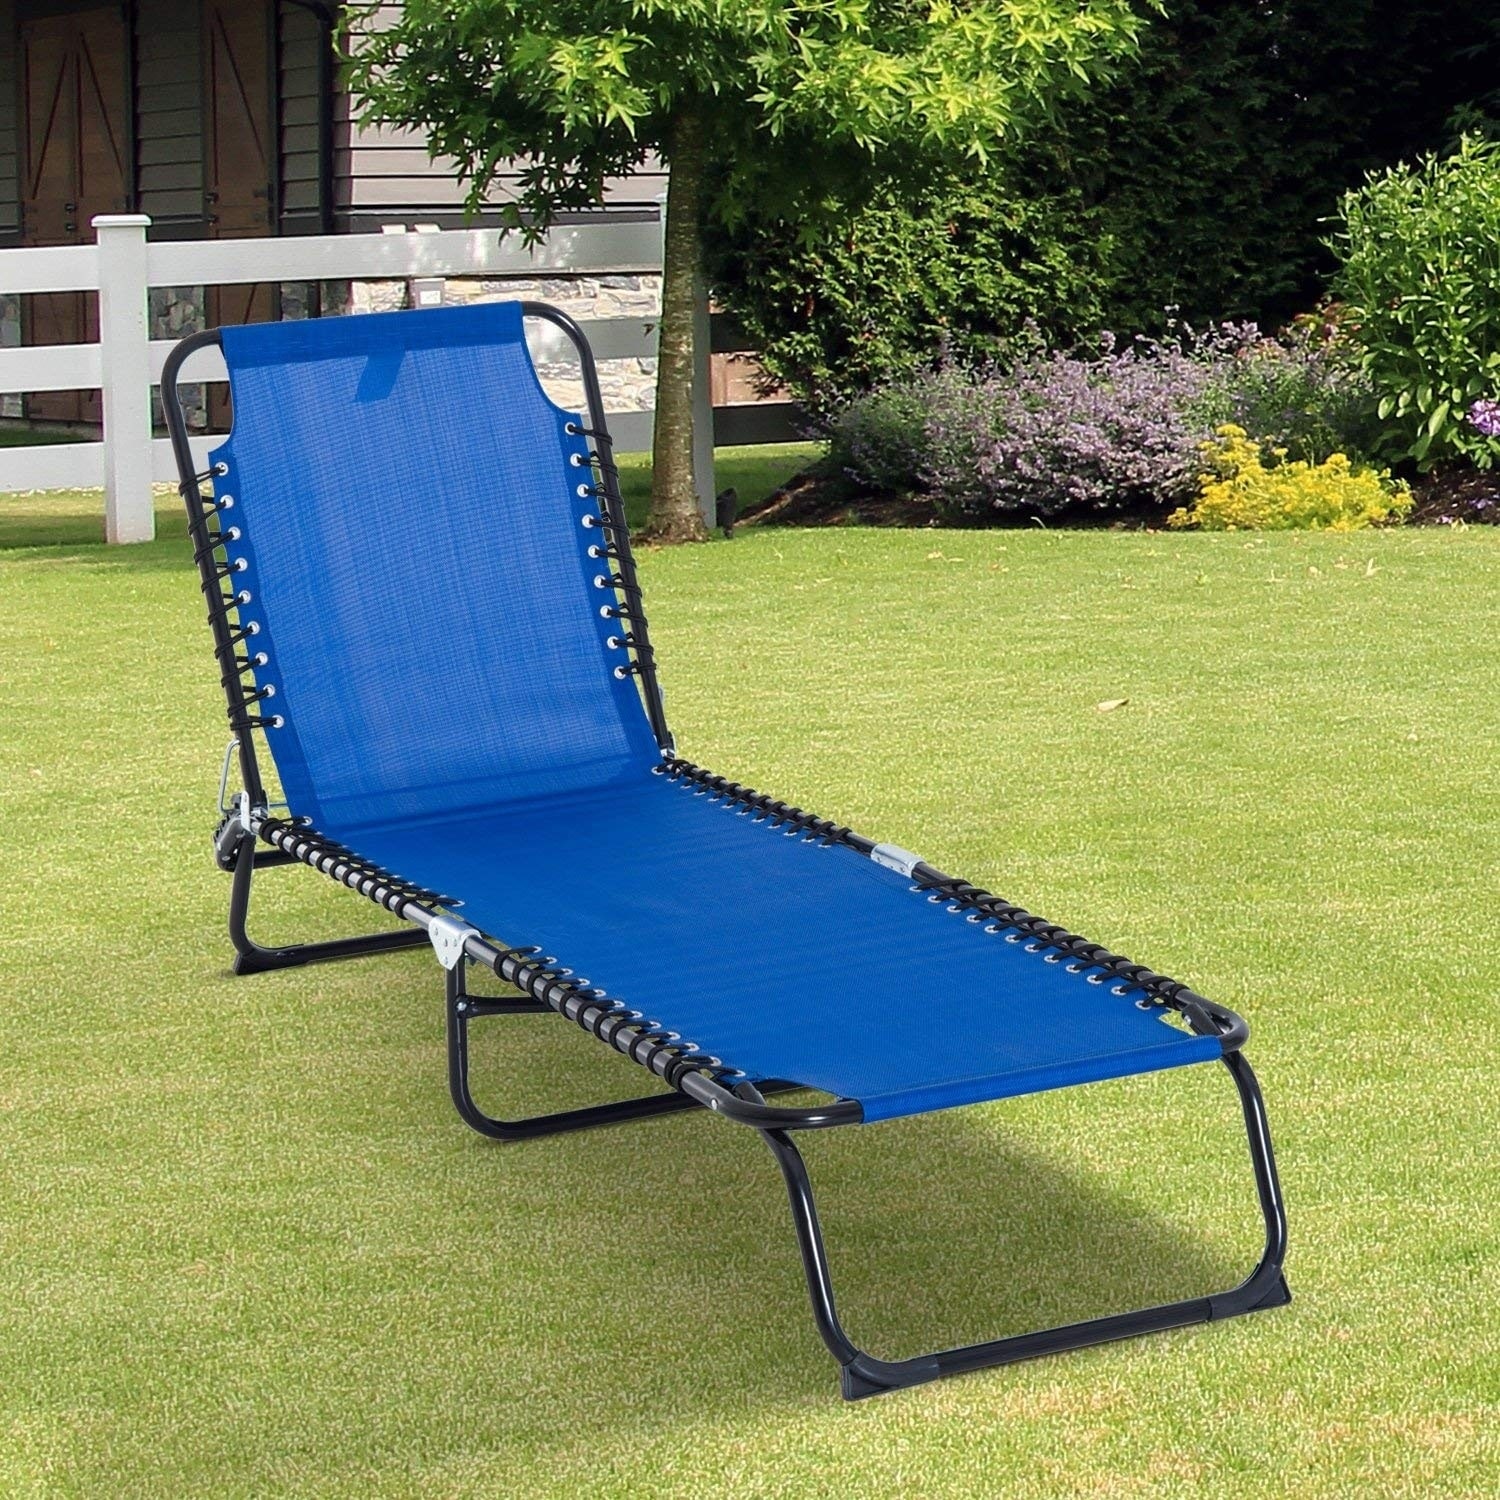 Outsunny 3-Position Reclining Beach Chair Chaise Lounge Blue | eBay